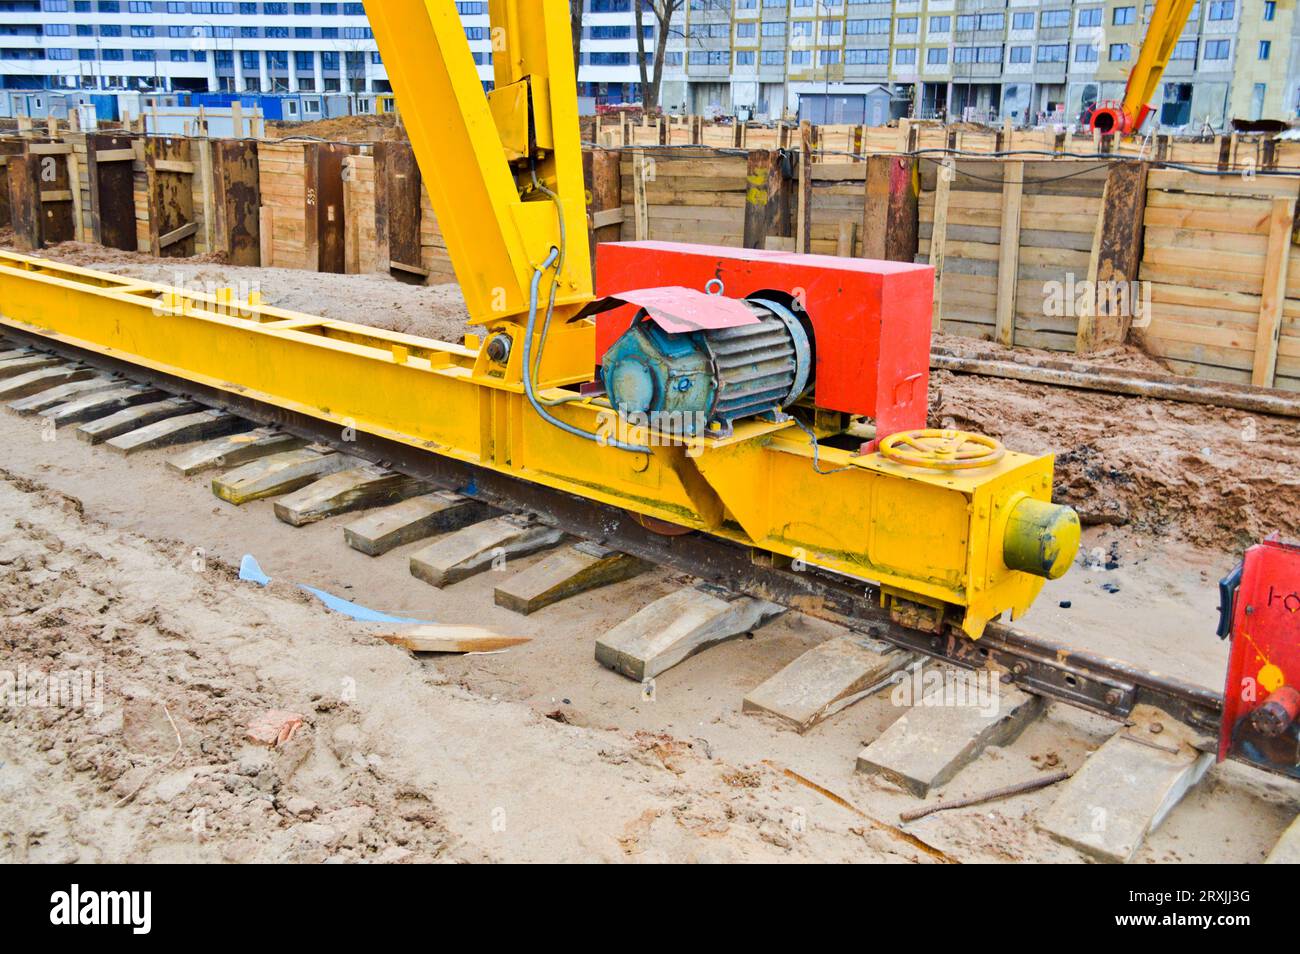 Large iron metal yellow supports on rails with wheels with an induction motor of a large construction stationary industrial powerful gantry crane of a Stock Photo